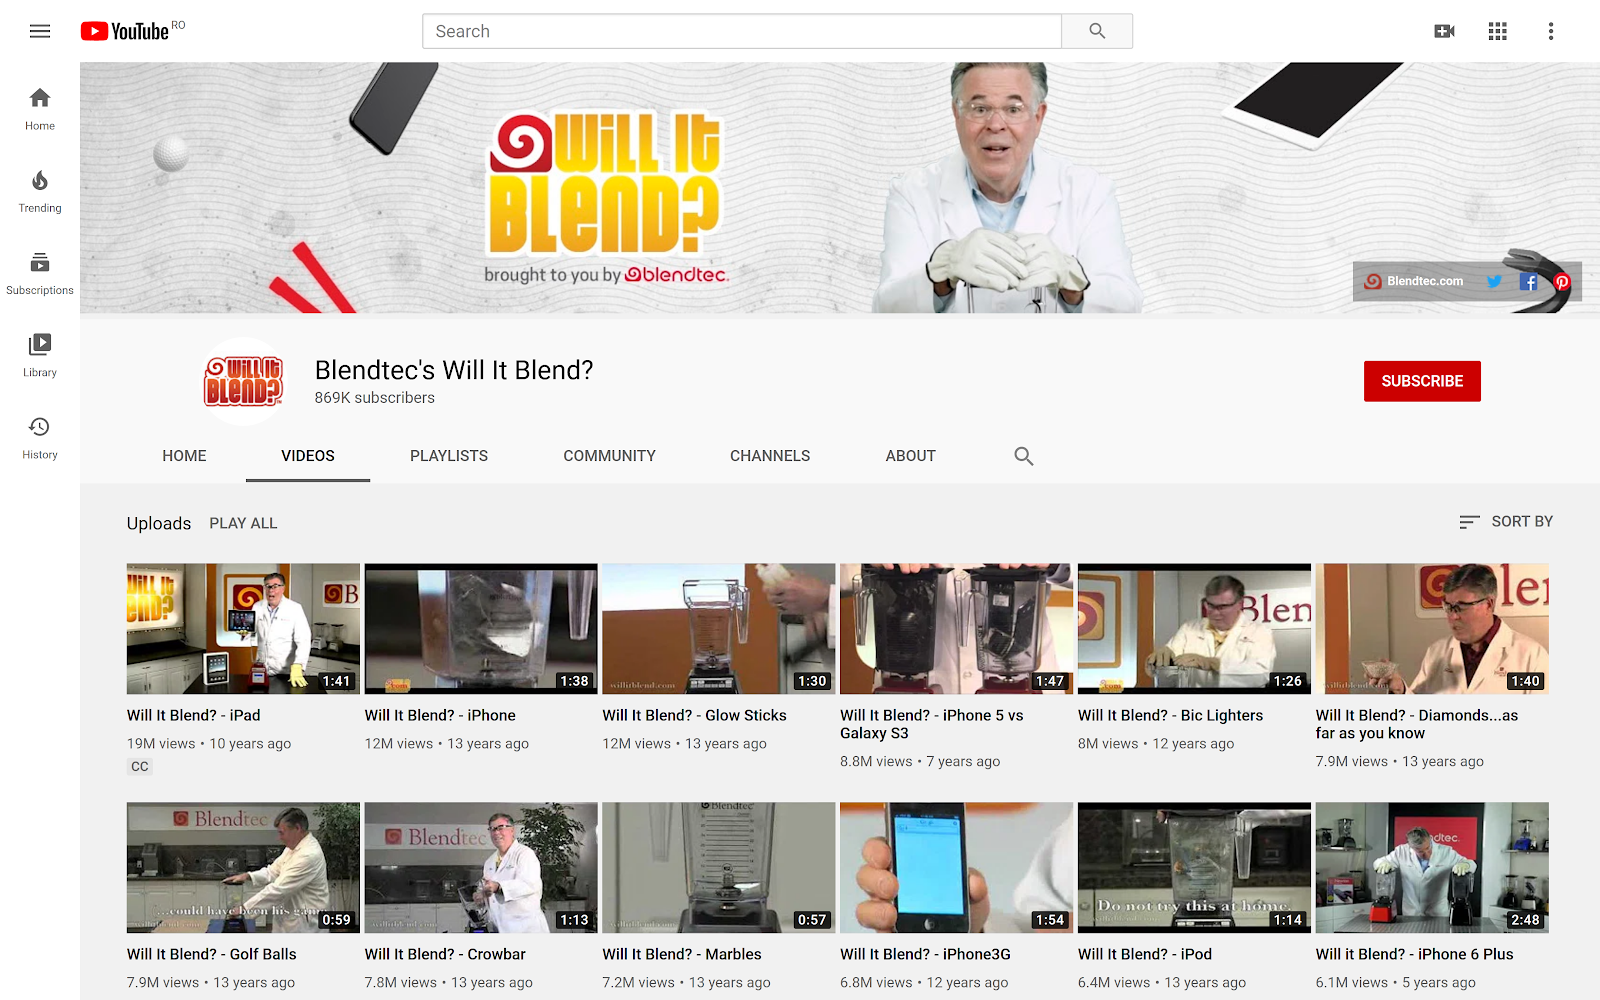 Will It Blend? Blendtec’s Unique Approach to Video